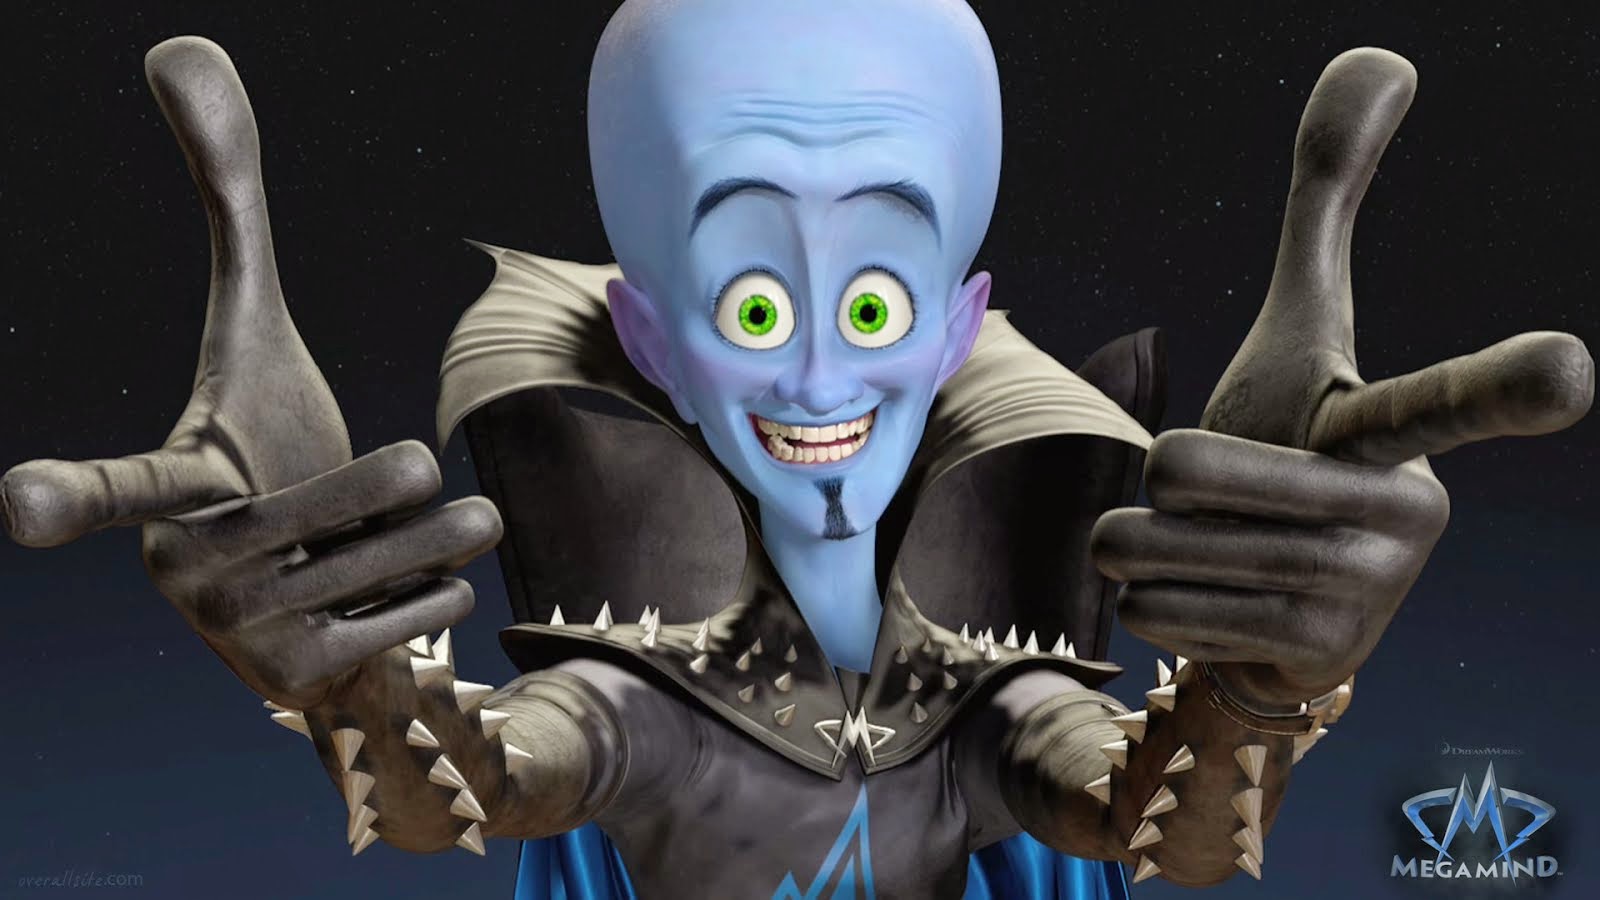 all awesome stuff by MEGAMIND